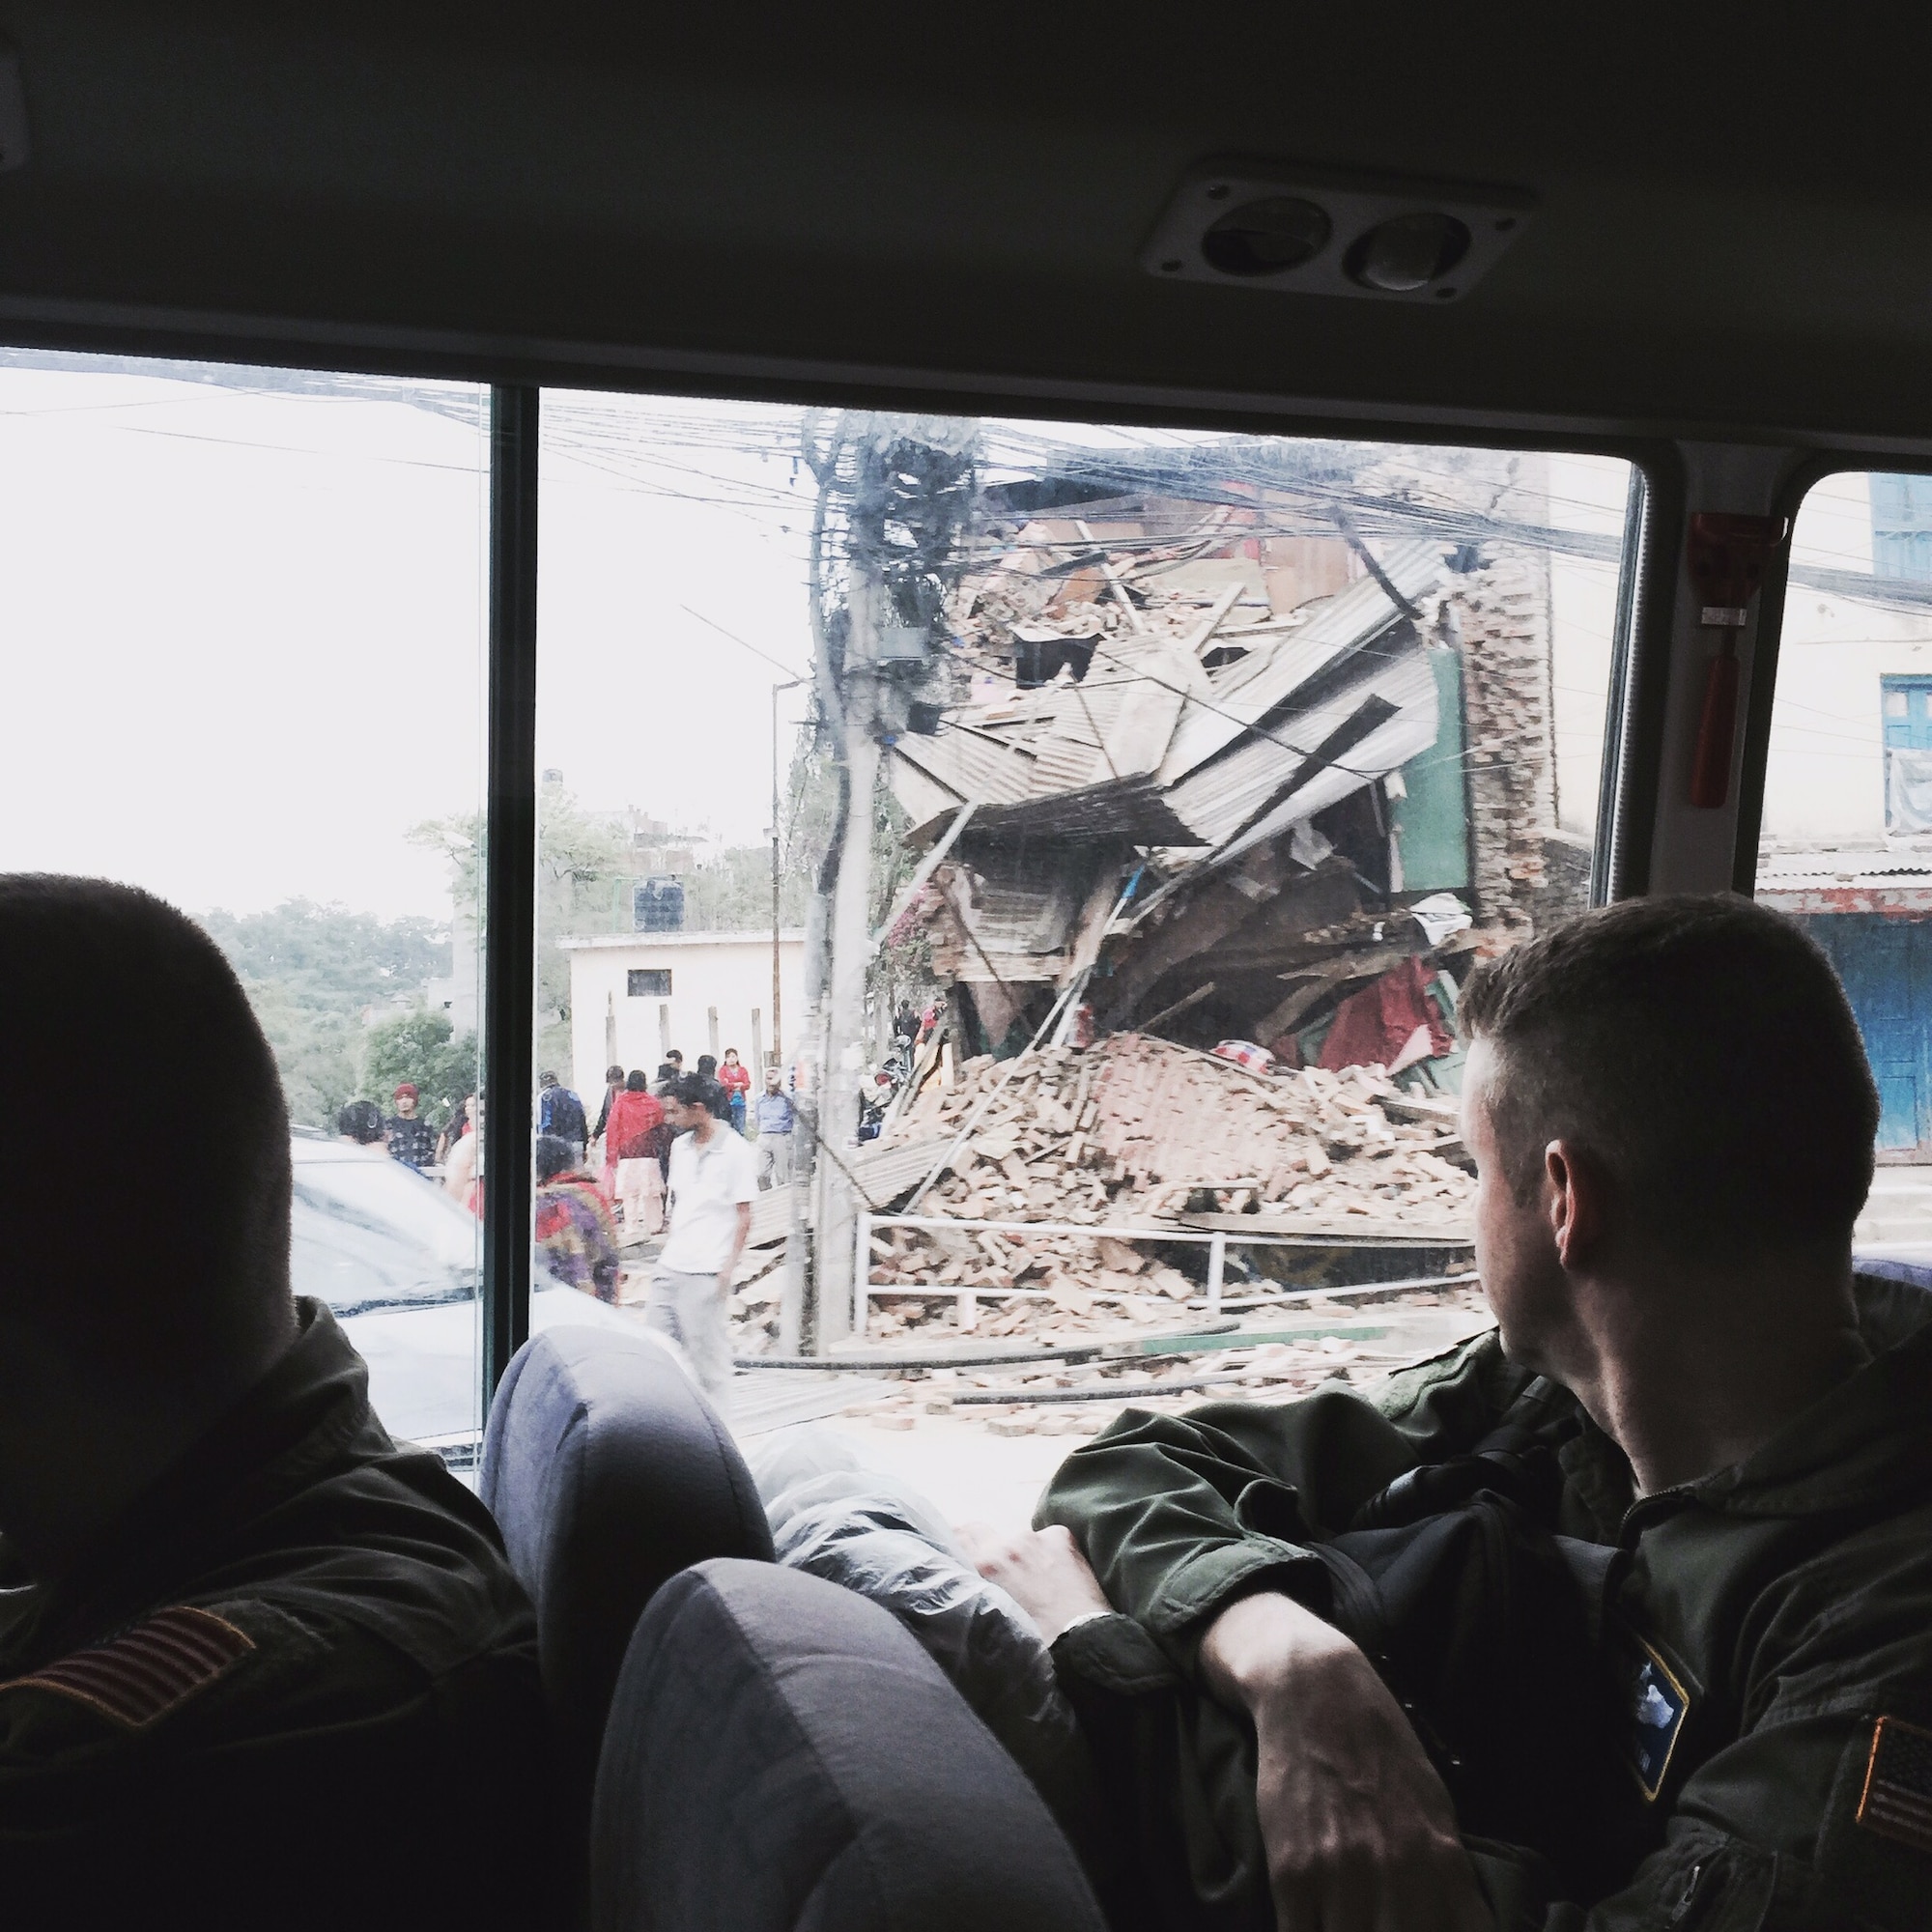 Members of the U.S. Air Force view the damage in Nepal firsthand following the devastating 7.8 magnitude earthquake that damaged many parts of the country. (Courtesy photo)